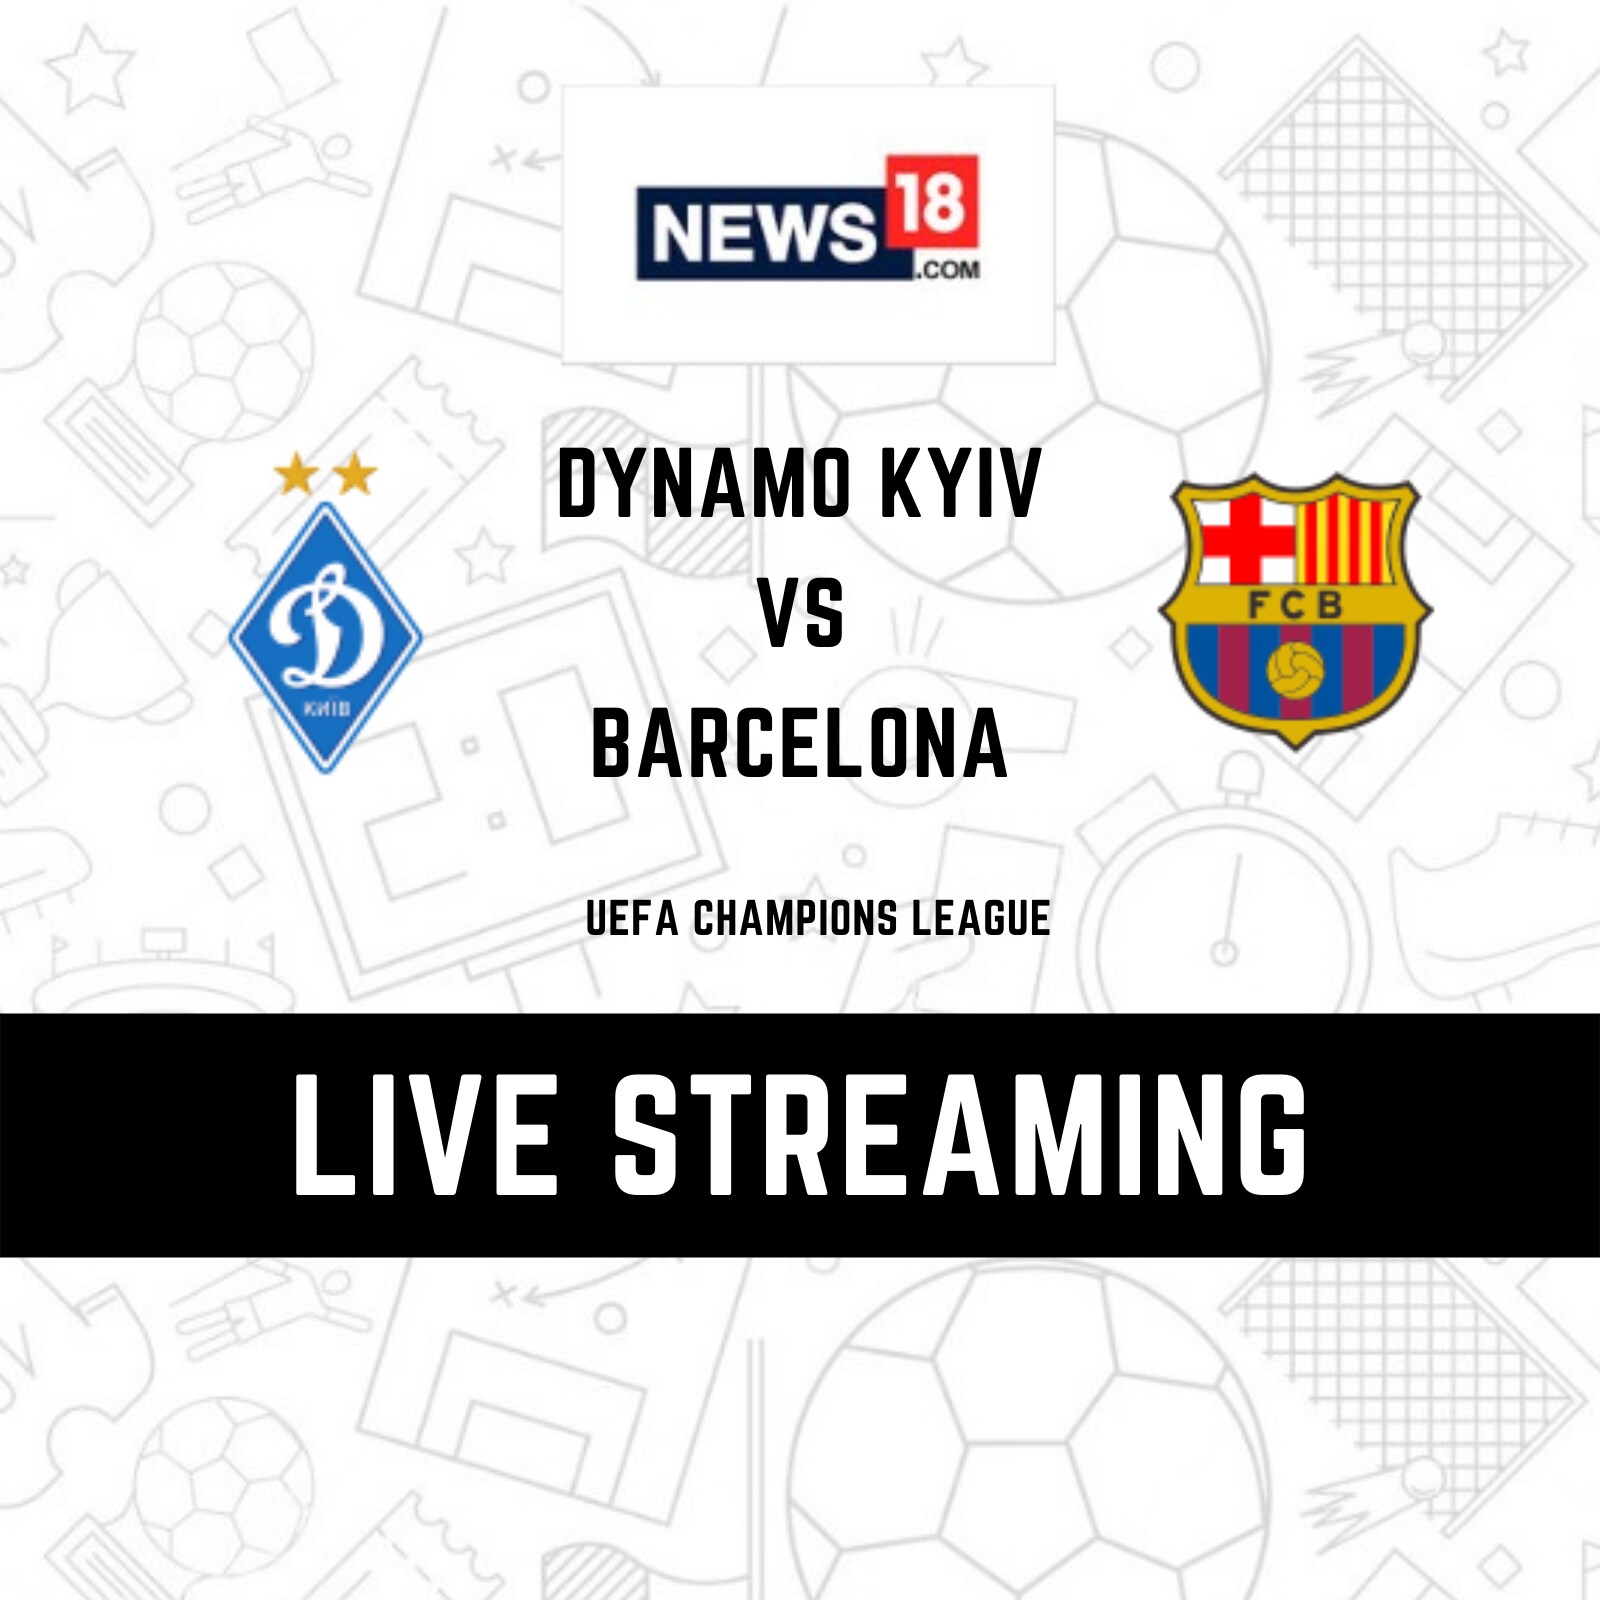 UEFA Champions League 2021-22 Dynamo Kyiv vs Barcelona LIVE Streaming When and Where to Watch Online, TV Telecast, Team News